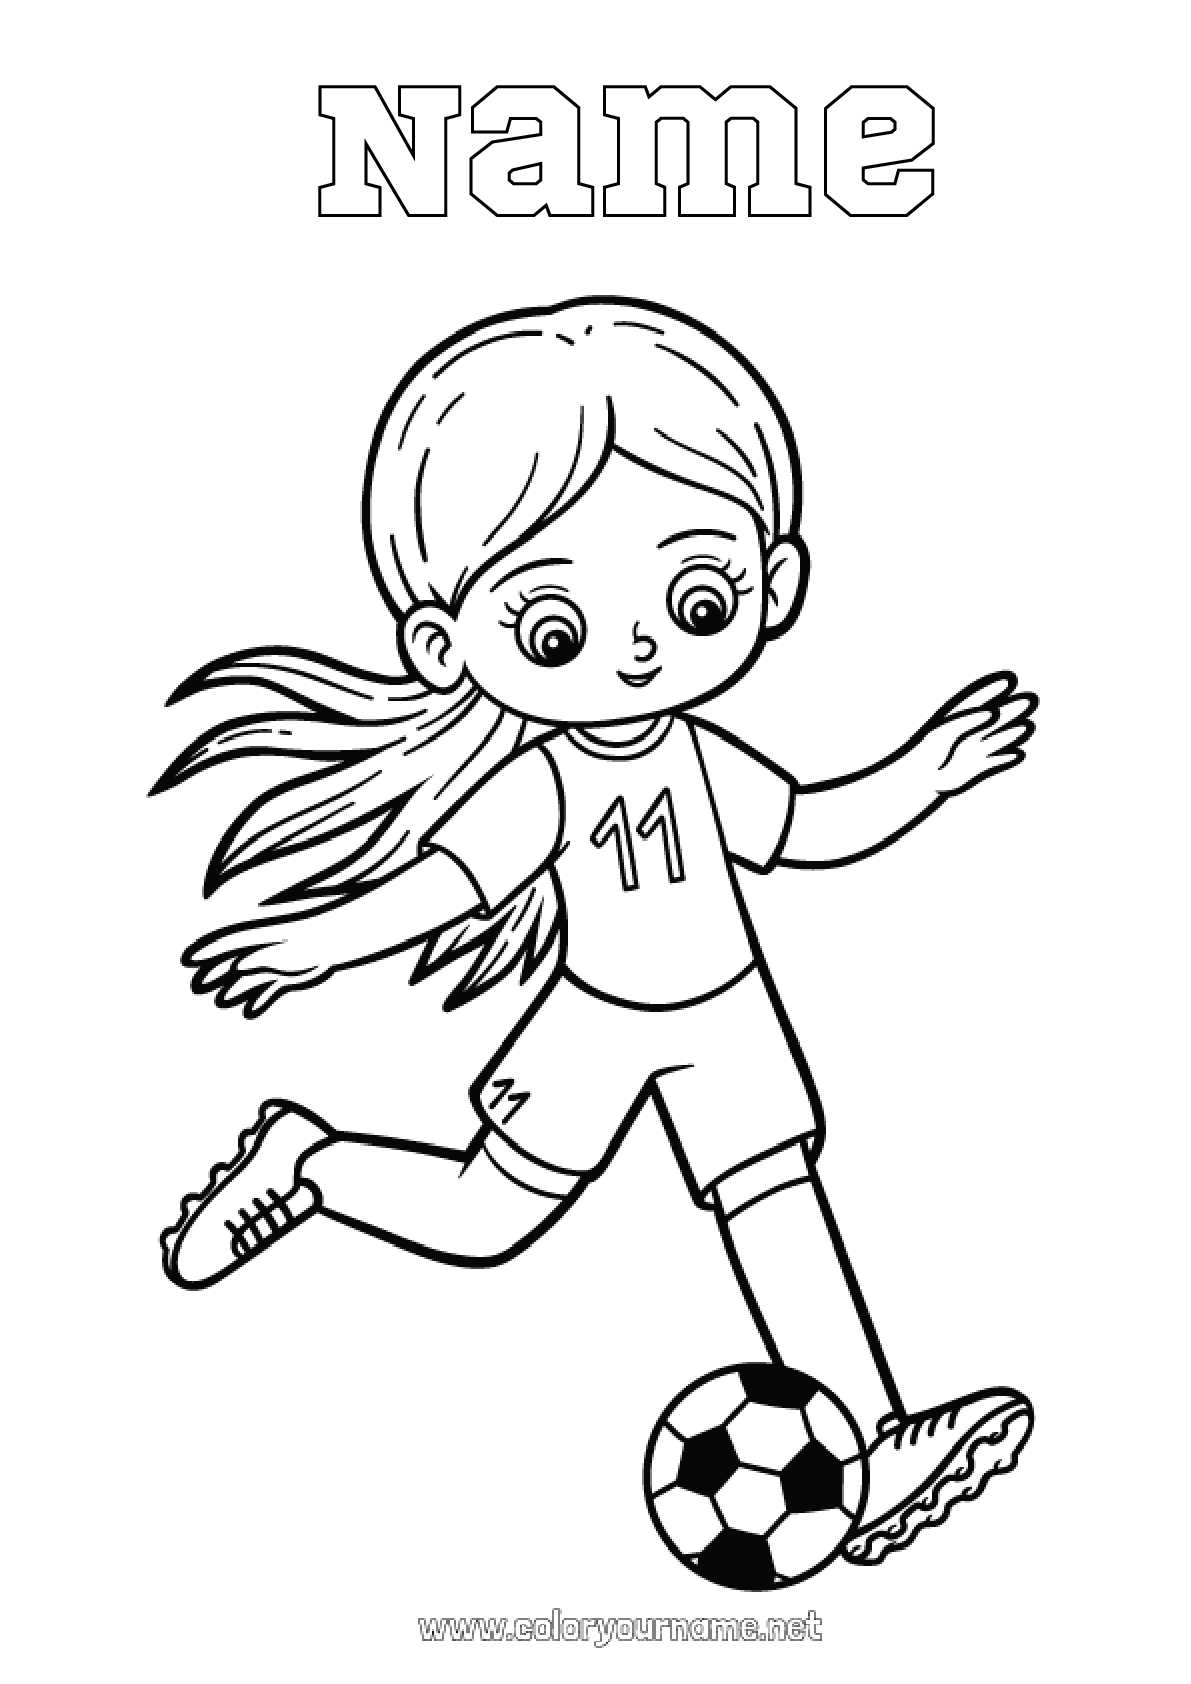 coloring pages for boys football players